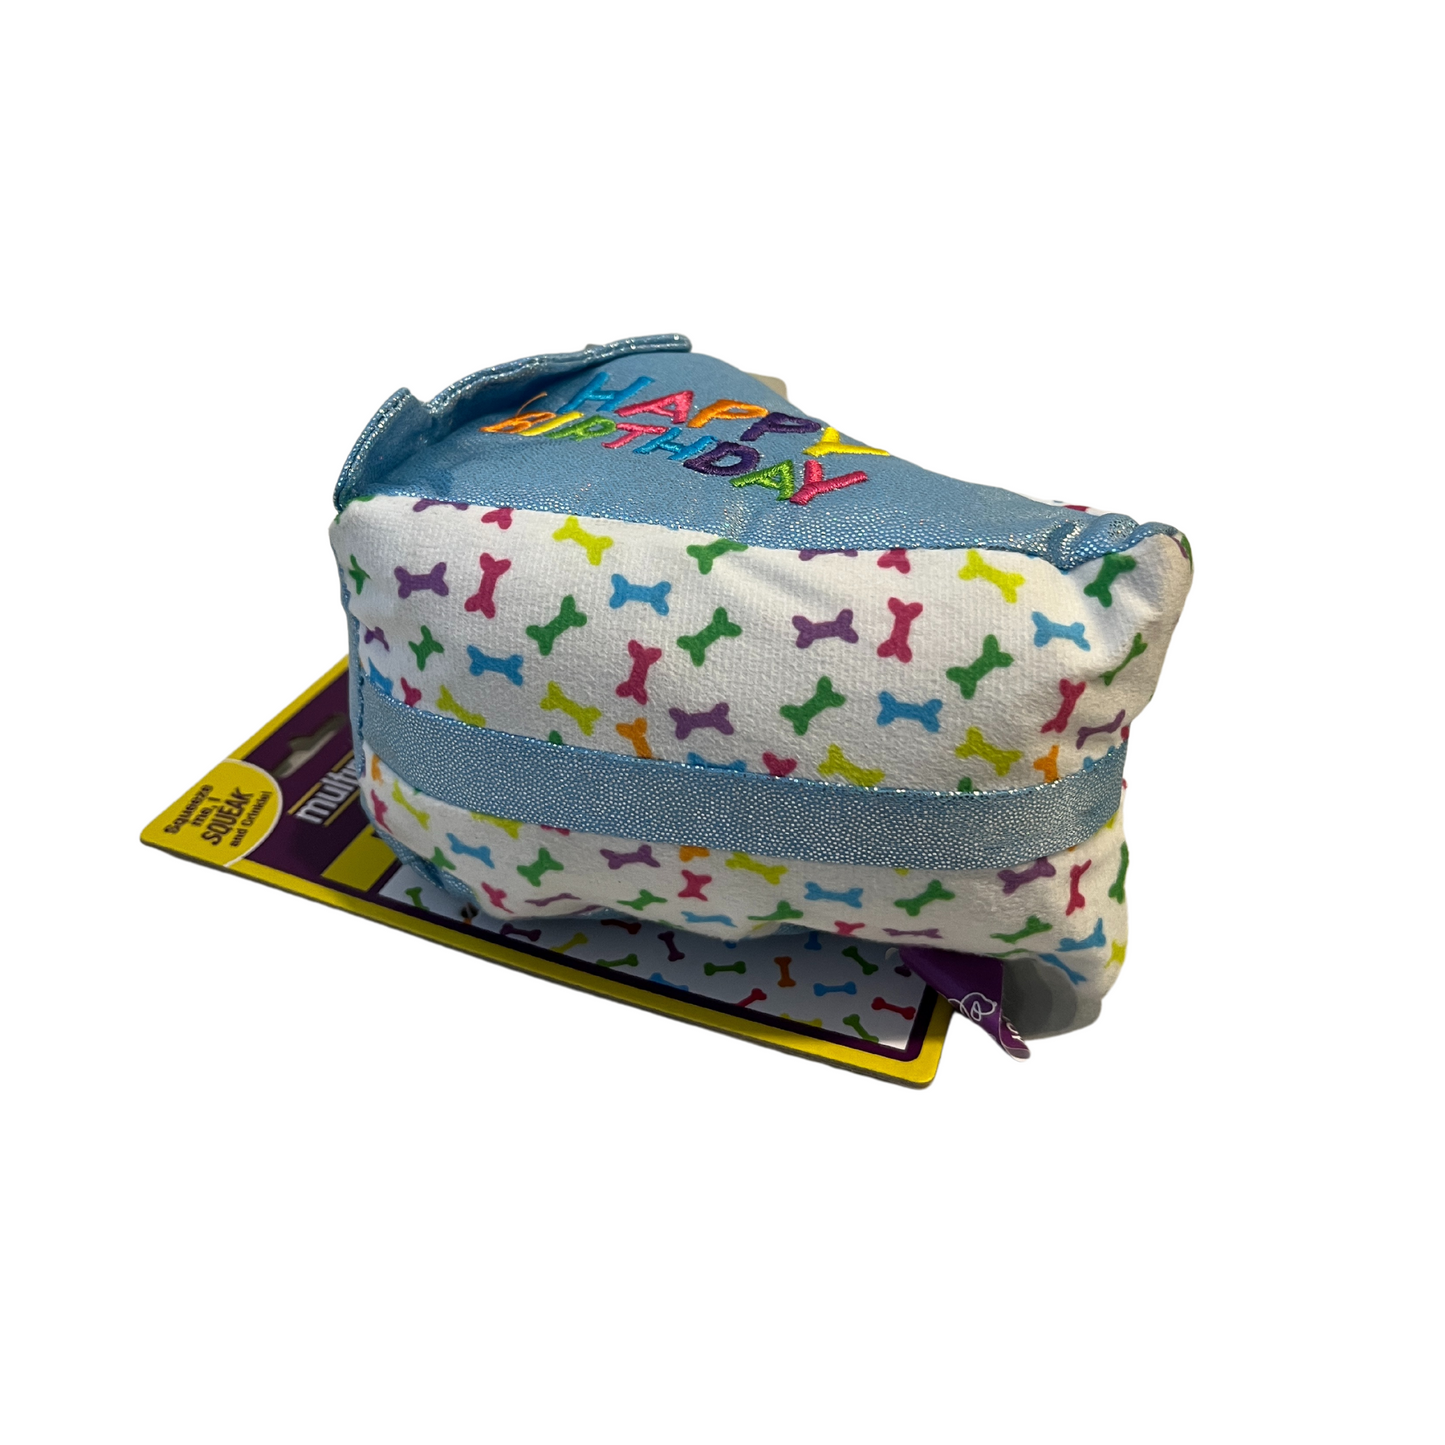 Multipet Birthday Cake Slice Dog Toy- Available in Pink, Blue, or Green